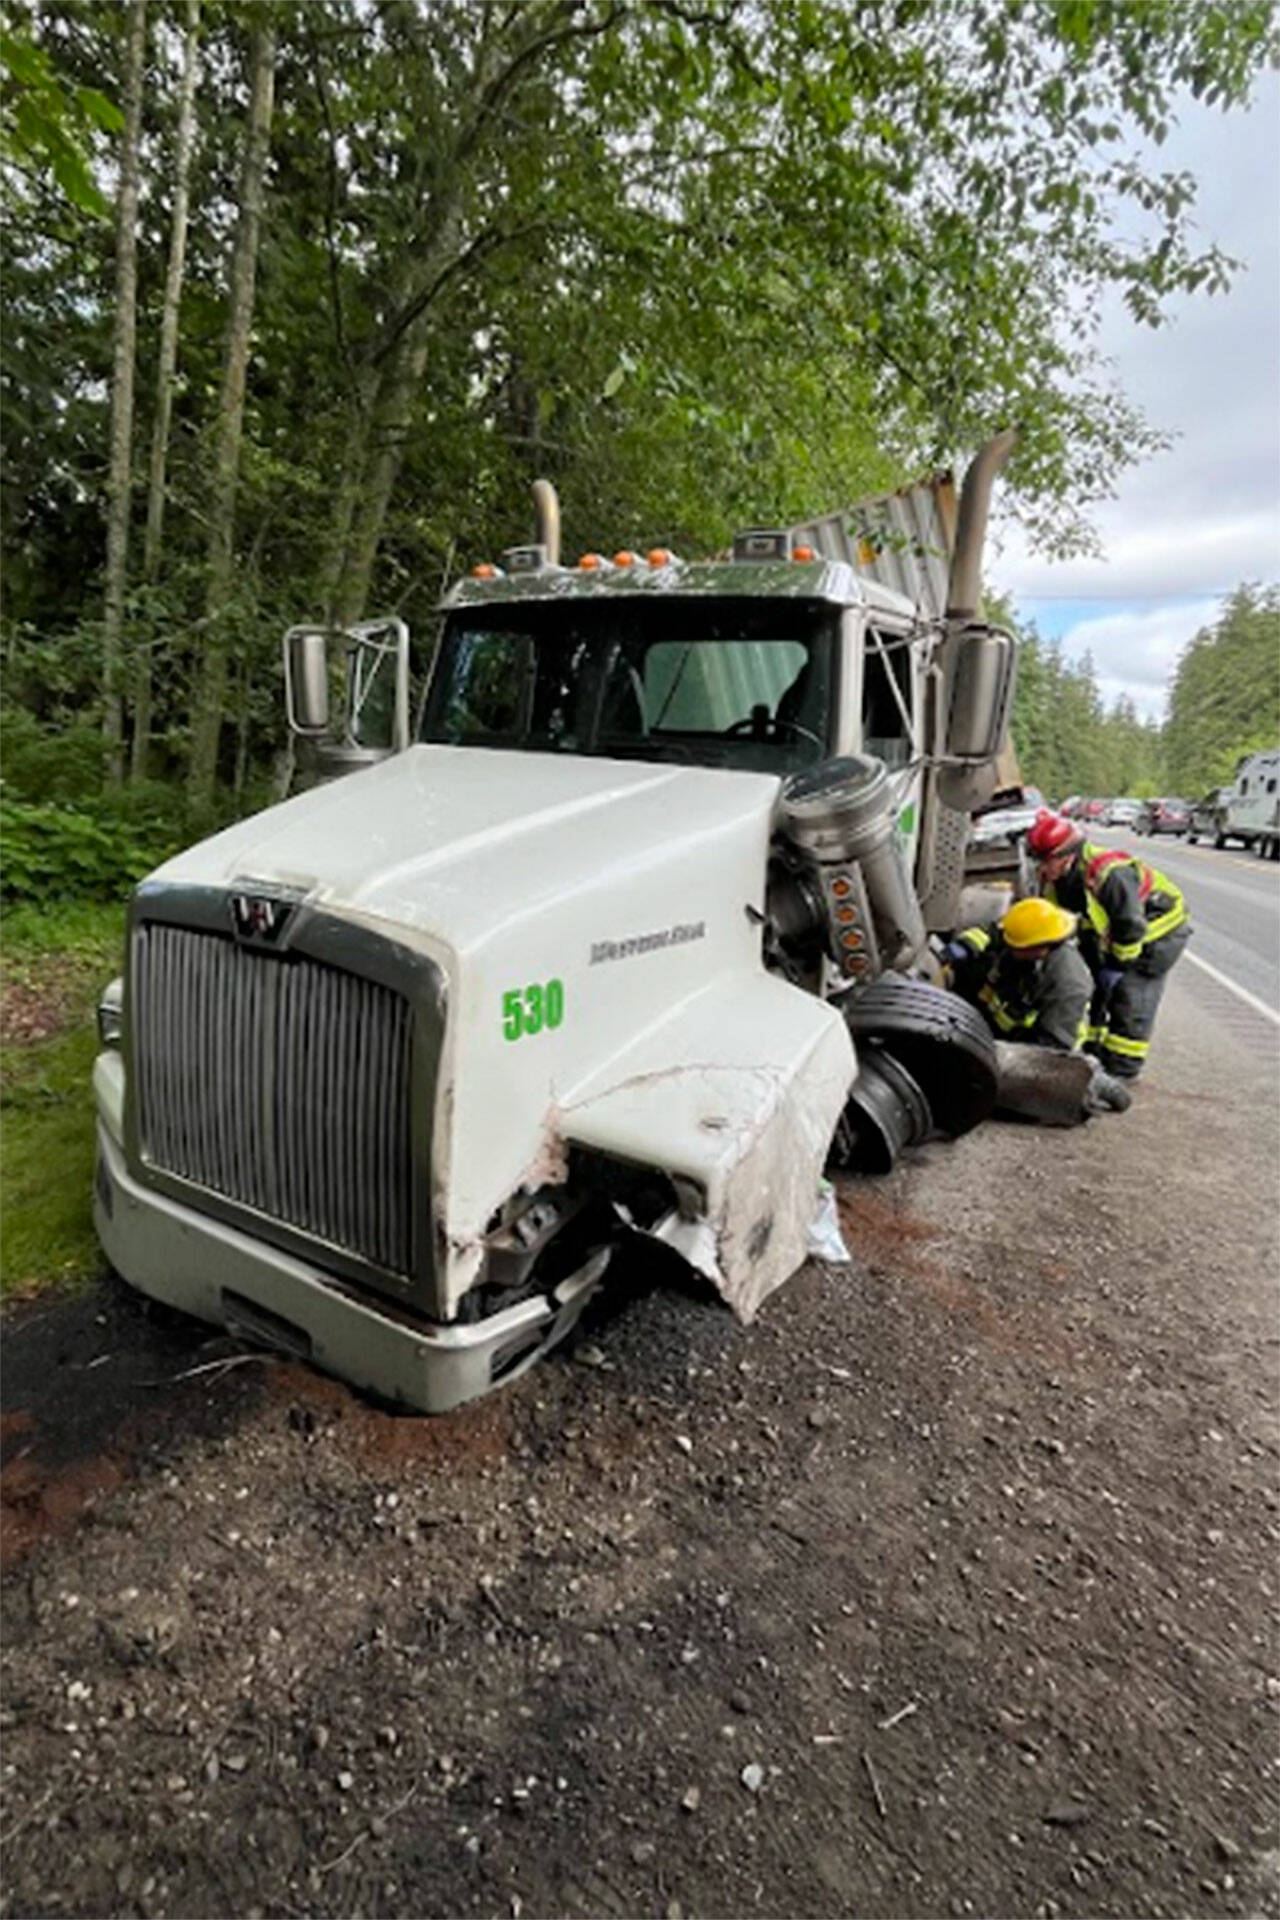 Photo courtesy Clallam County Fire District 3/ Three people were transported to area hospitals for injuries on Monday, June 17 after a collision on U.S. Highway 101 that involved two SUVs and a semi-truck.